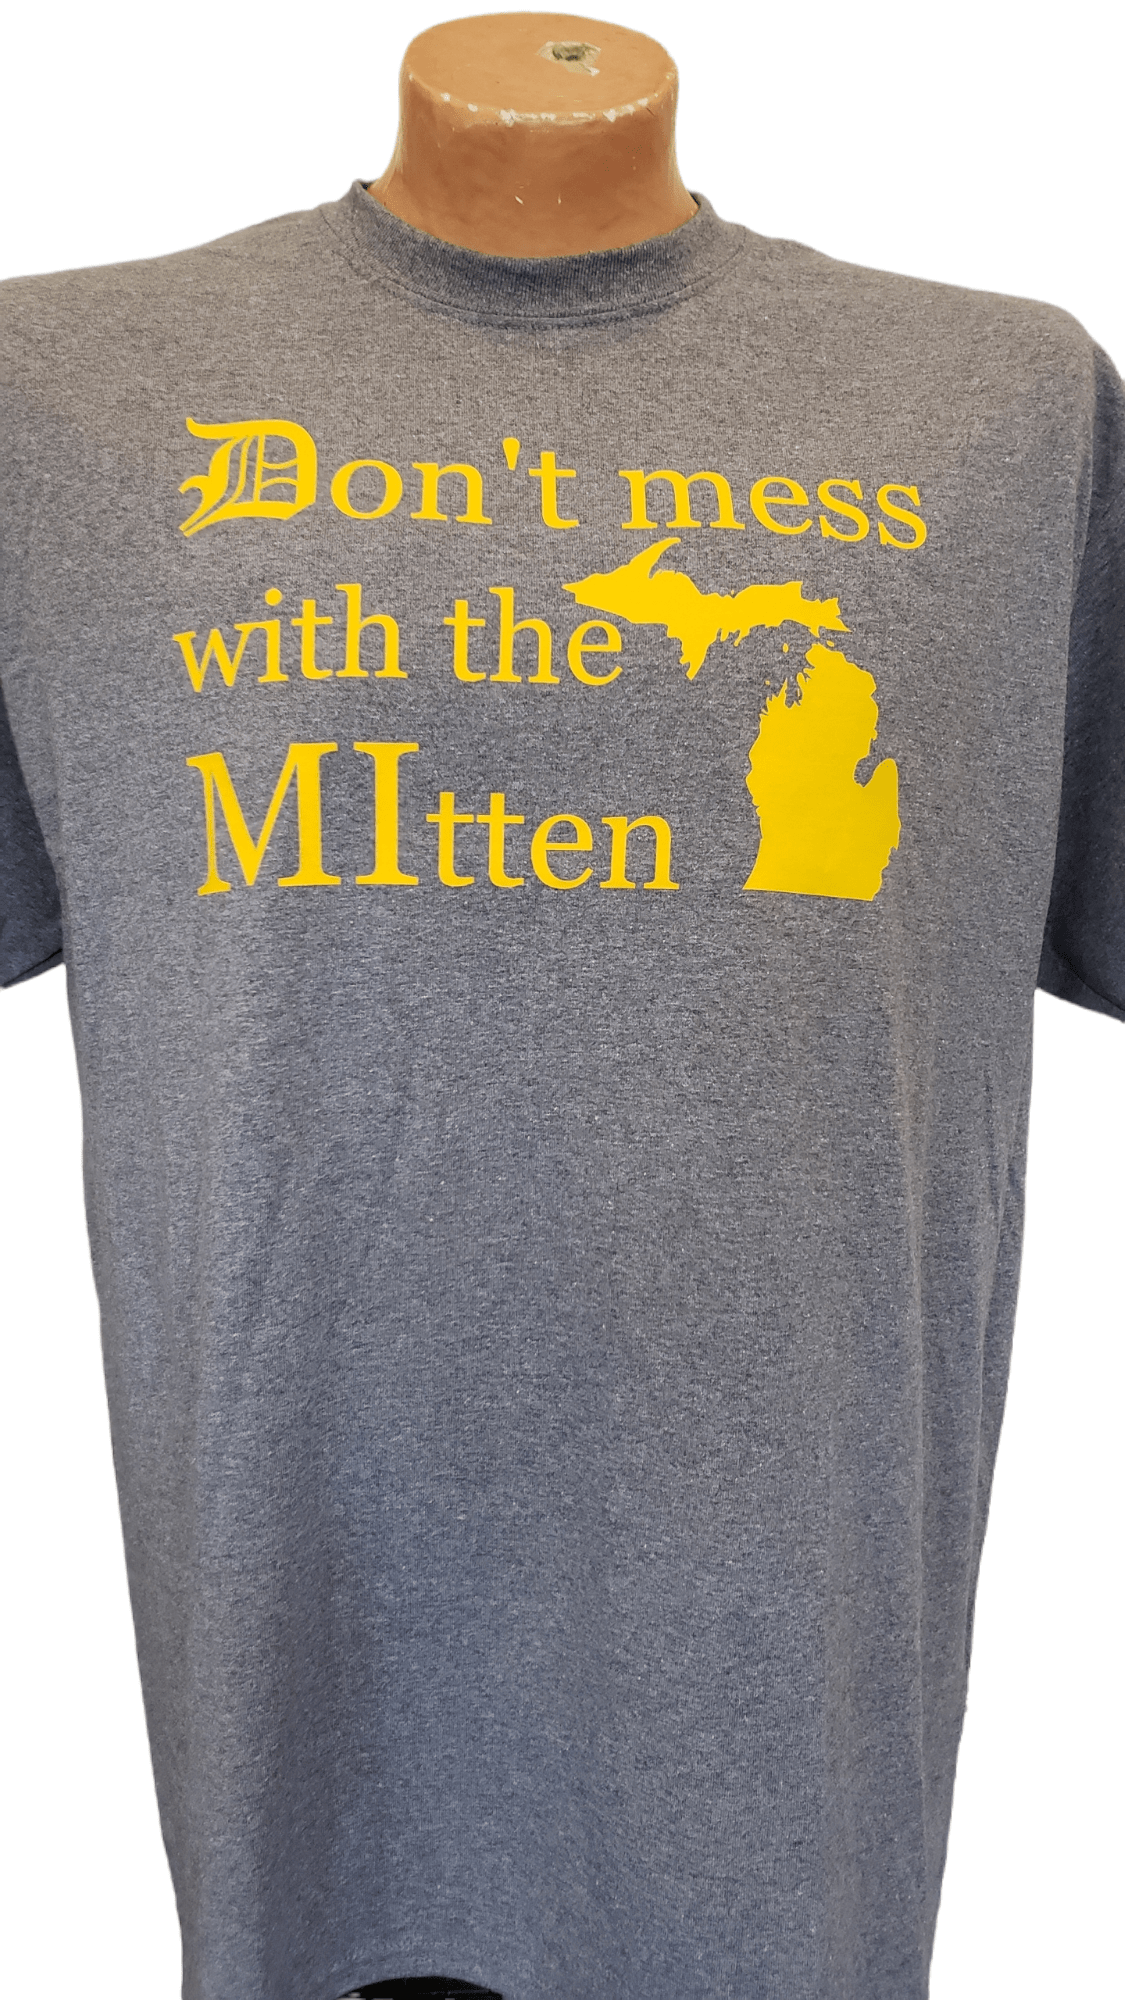 Carrot Stick Sports Shirts X-Large Don't Mess With The MItten T-Shirt